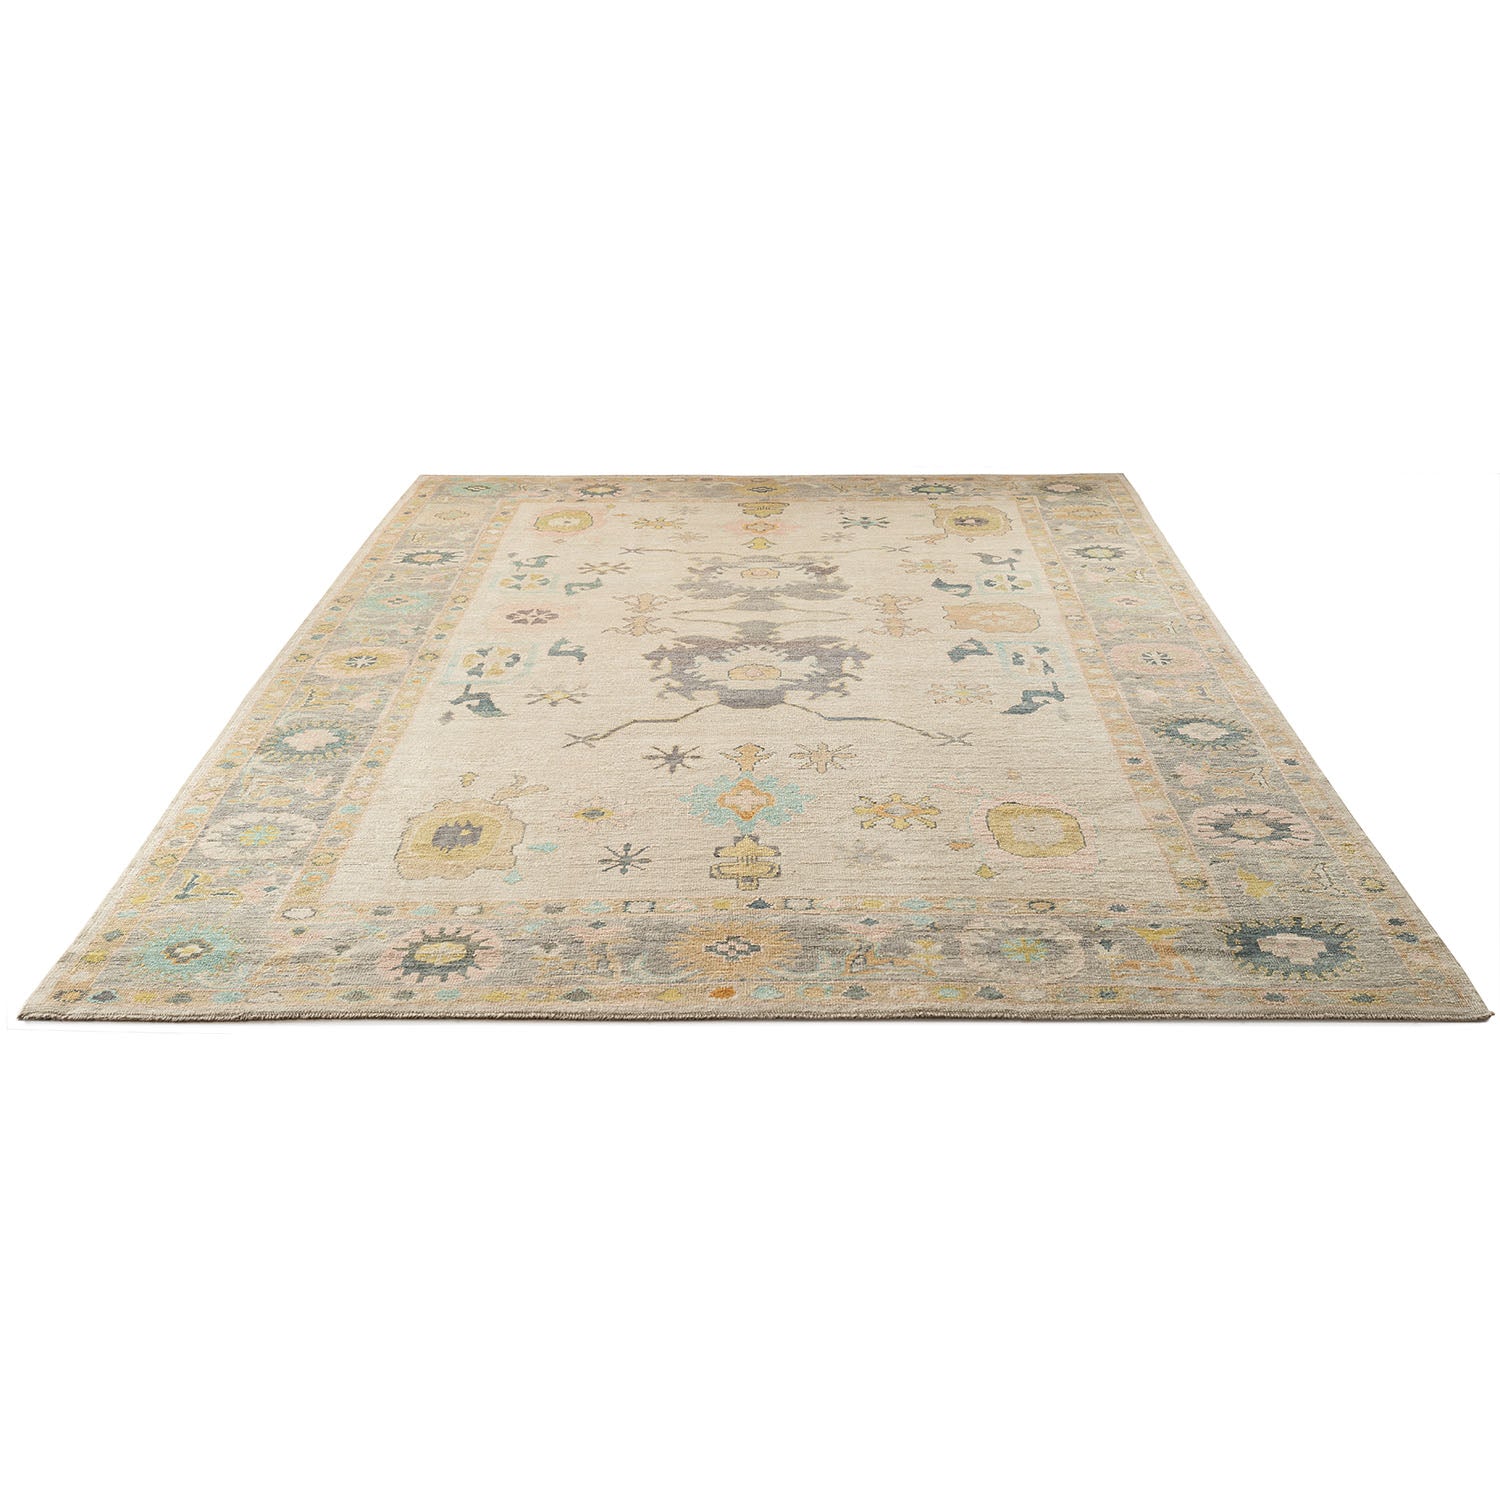 Vintage rectangular area rug with traditional patterned design in muted tones.